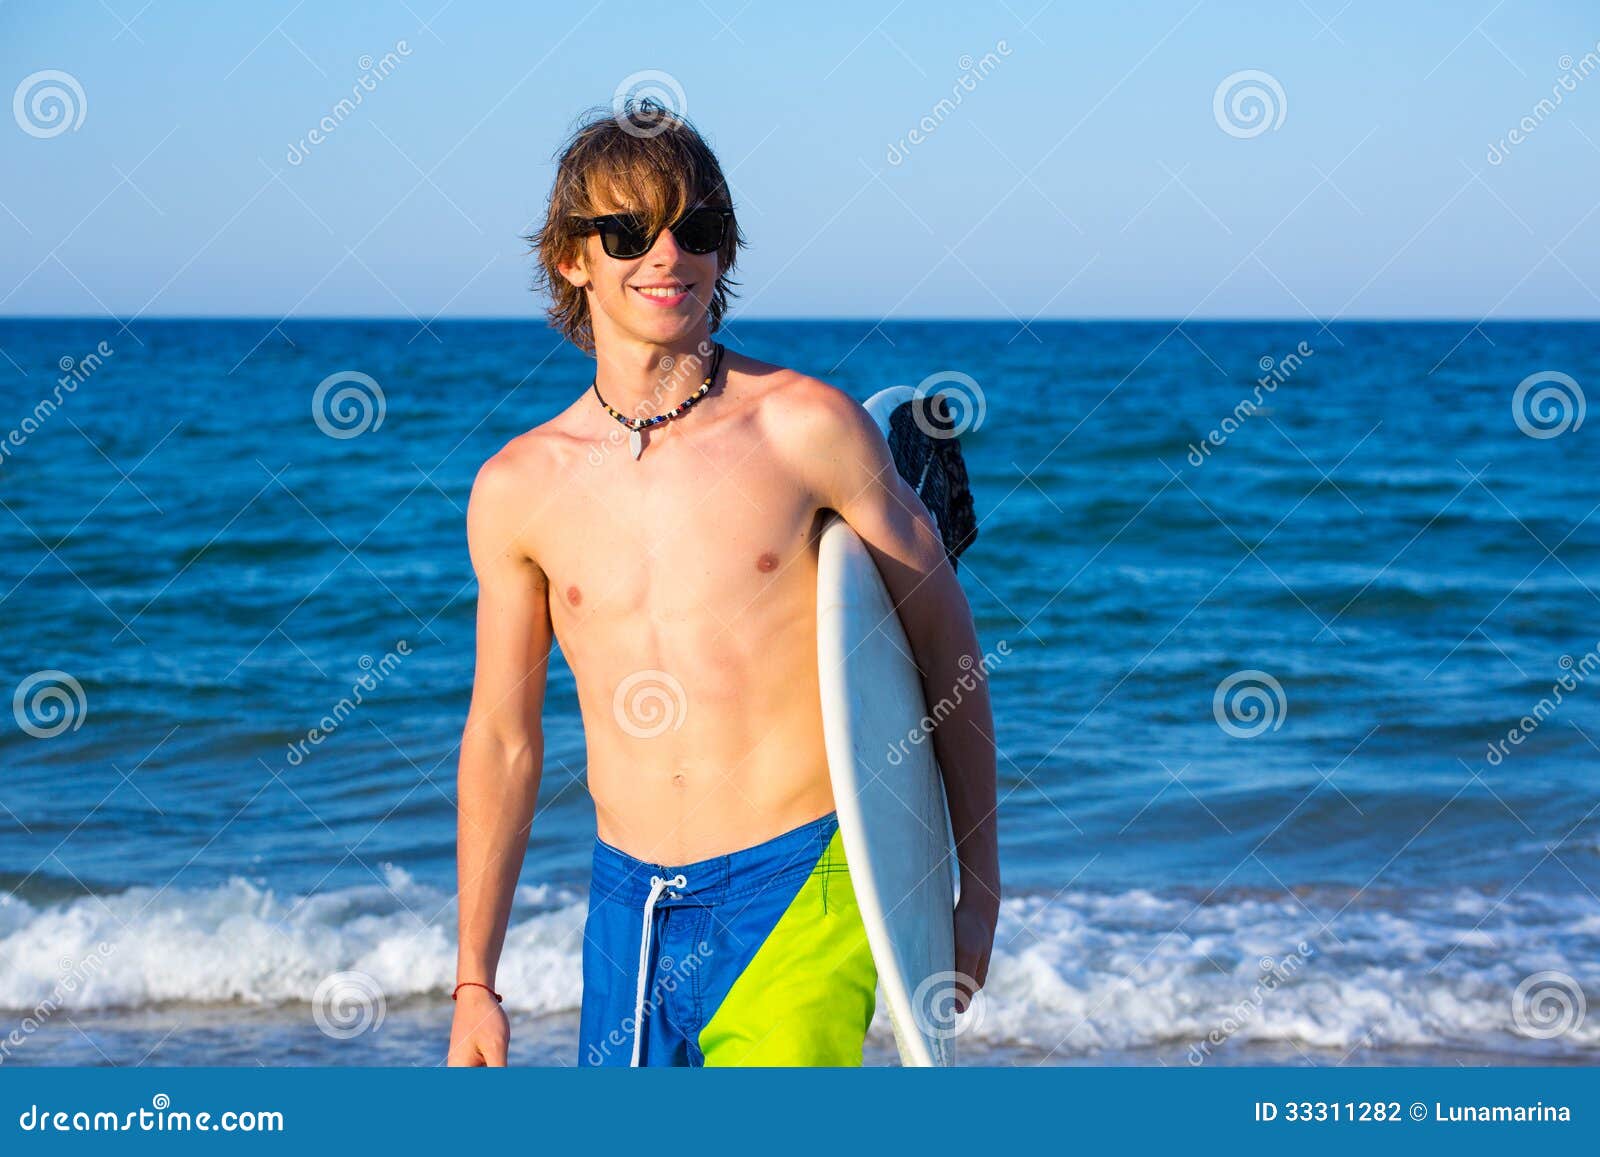 Boy Teen Surfer Happy Holing Surfboard on the Beach Stock Photo - Image ...